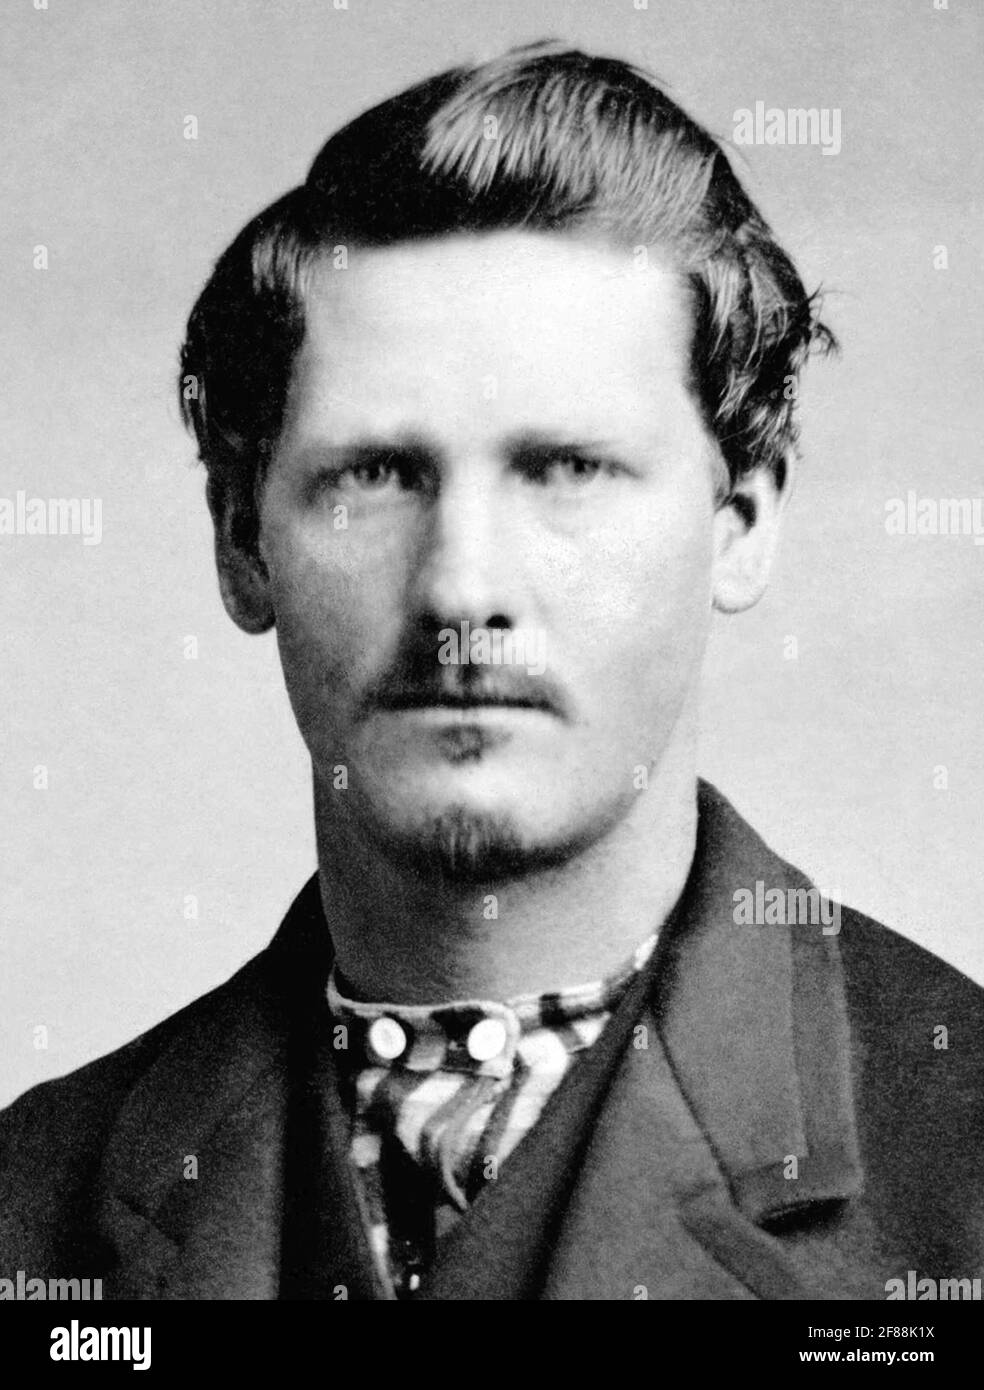 Vintage portrait photo of American lawman Wyatt Earp (1848 – 1929) – Earp, who took part in the famous gunfight at the O.K. Corral in 1881, is pictured circa 1870. Stock Photo